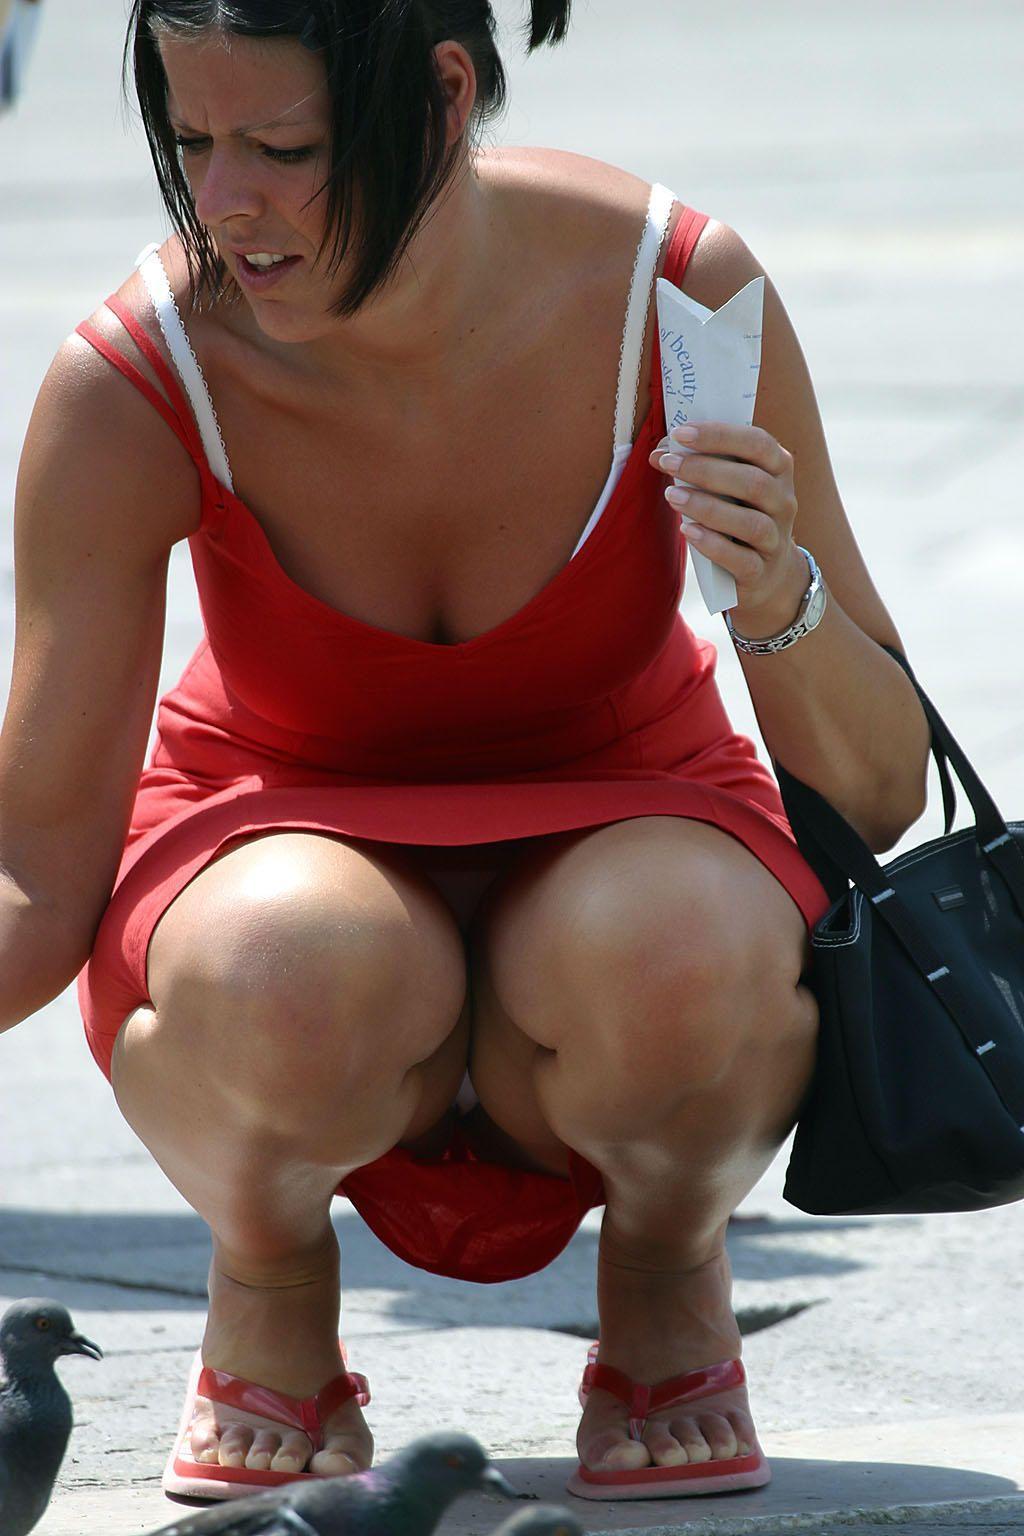 Candid sex gallery of A pantyhosed lady in outdoor upskirt images.